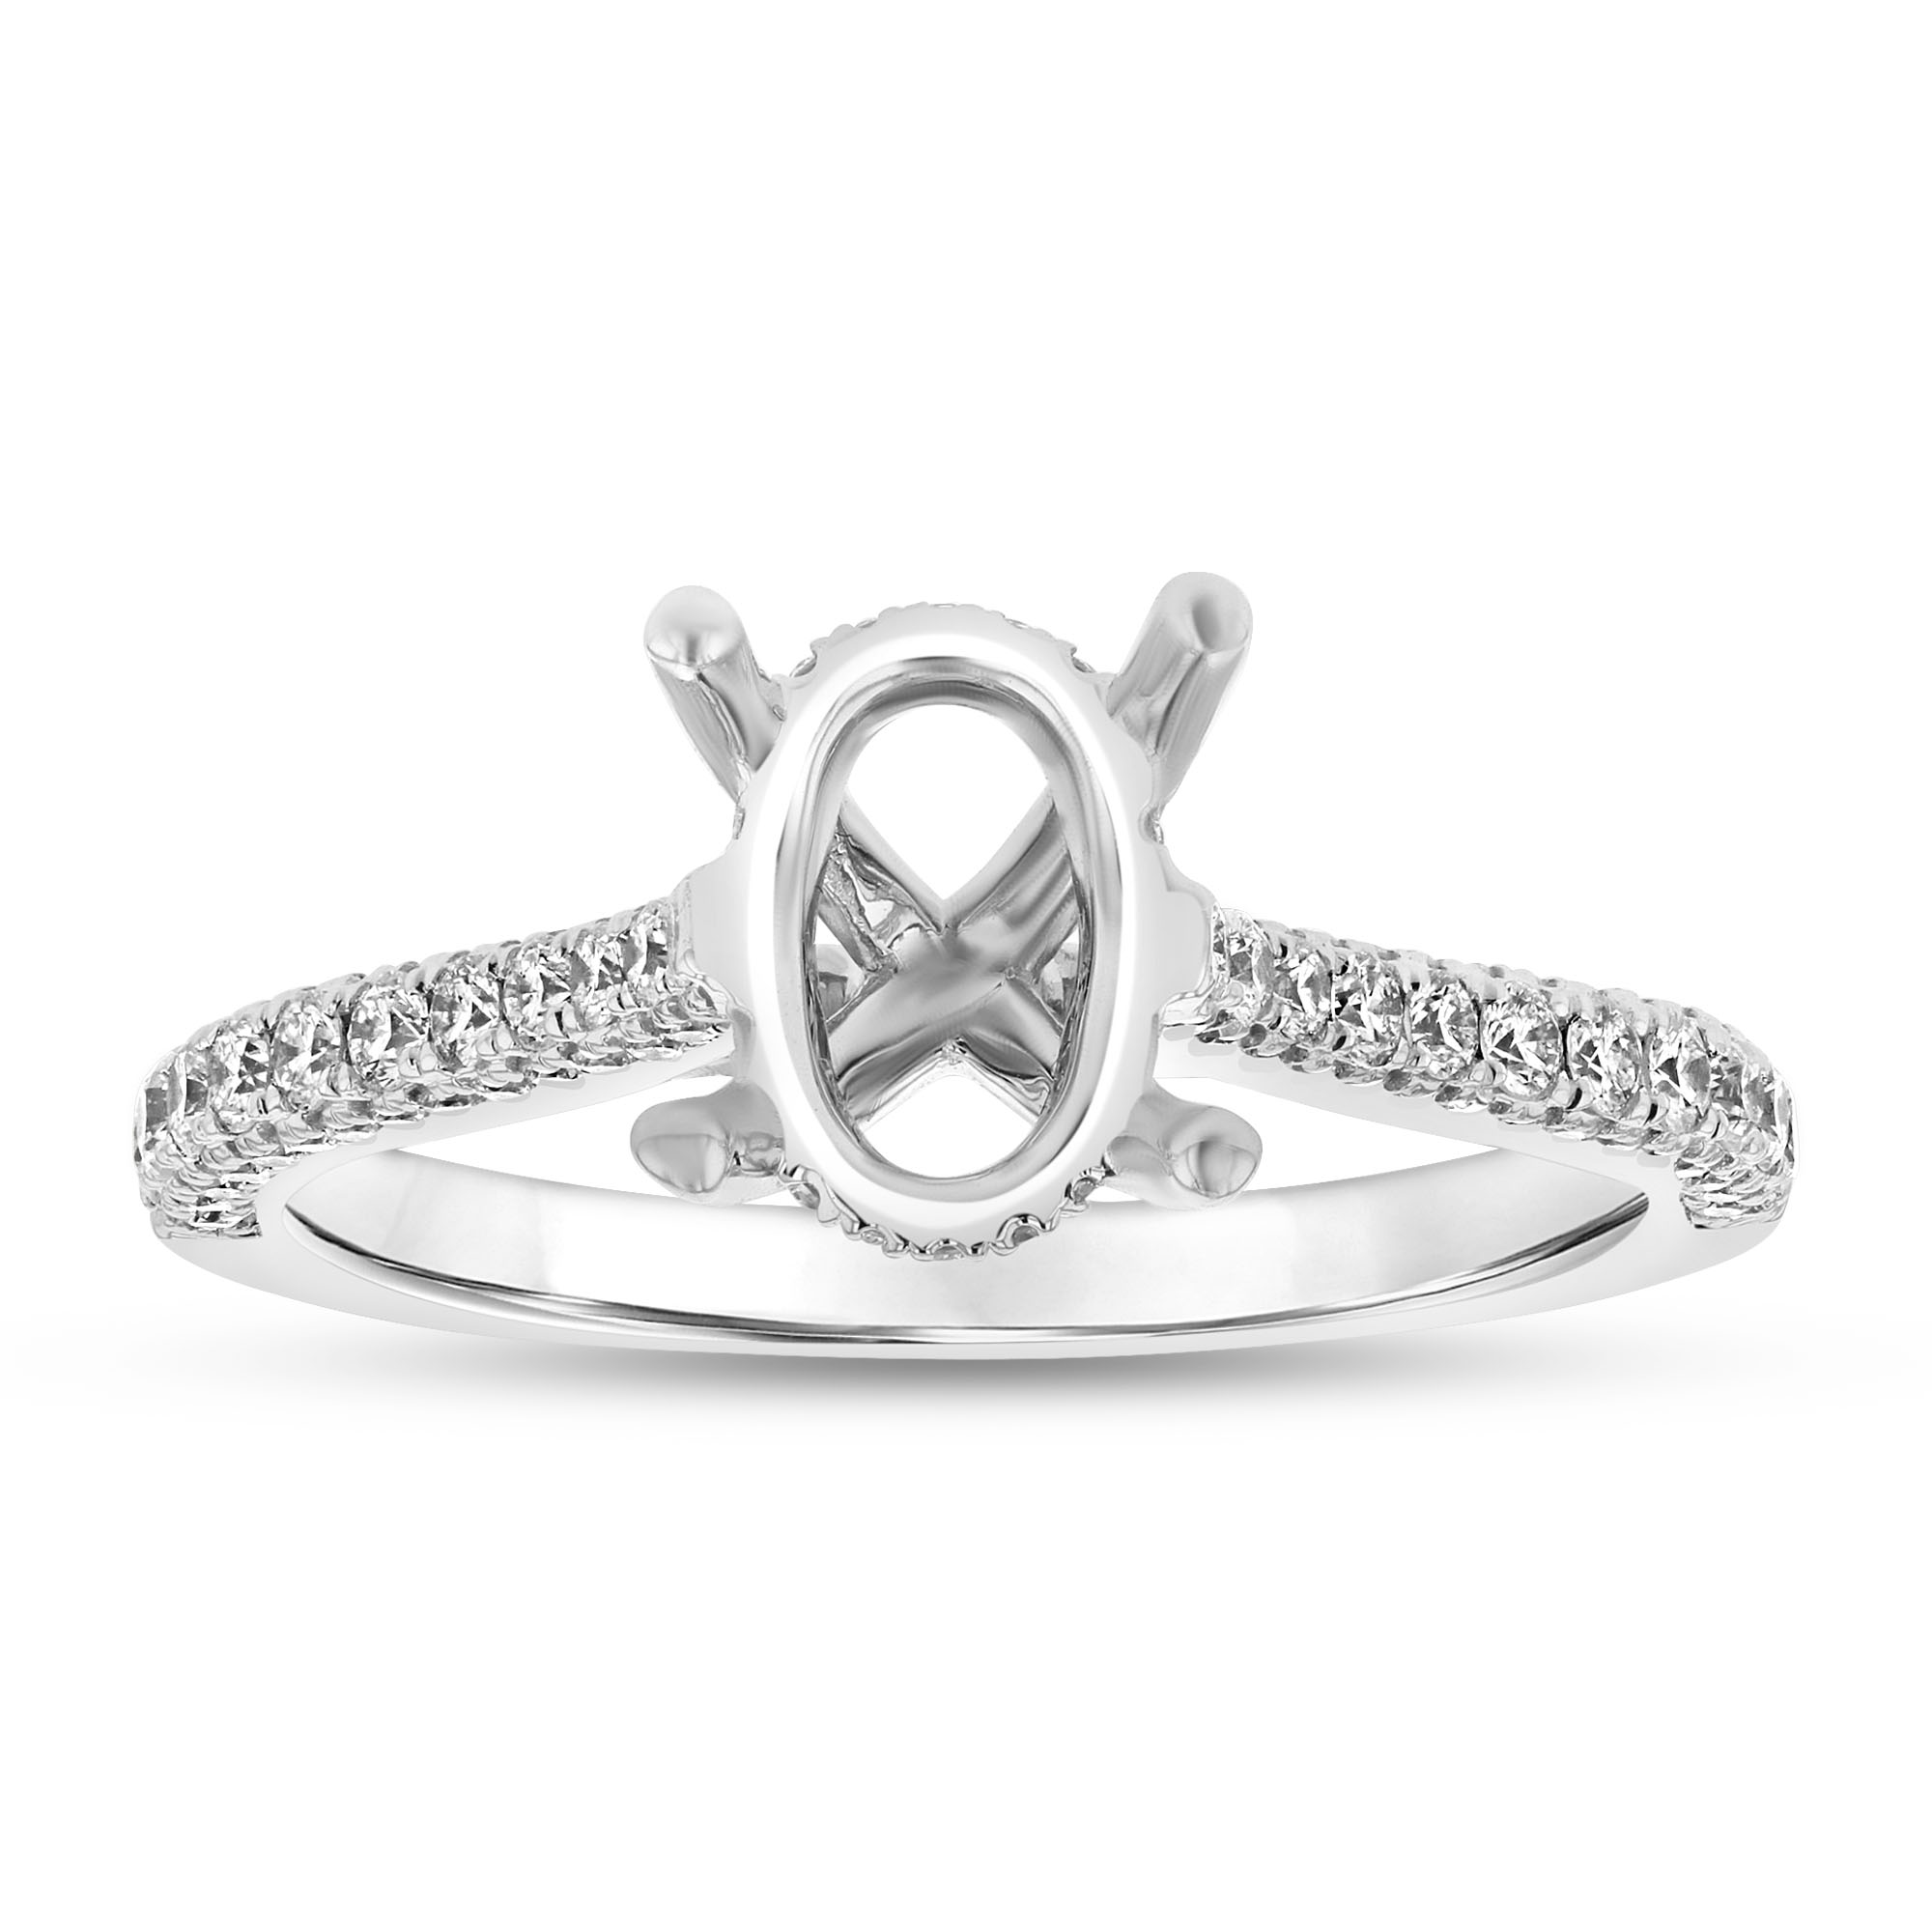 View 0.59ctw Diamond Semi Mount Under Halo Engagement Ring in 18k White Gold